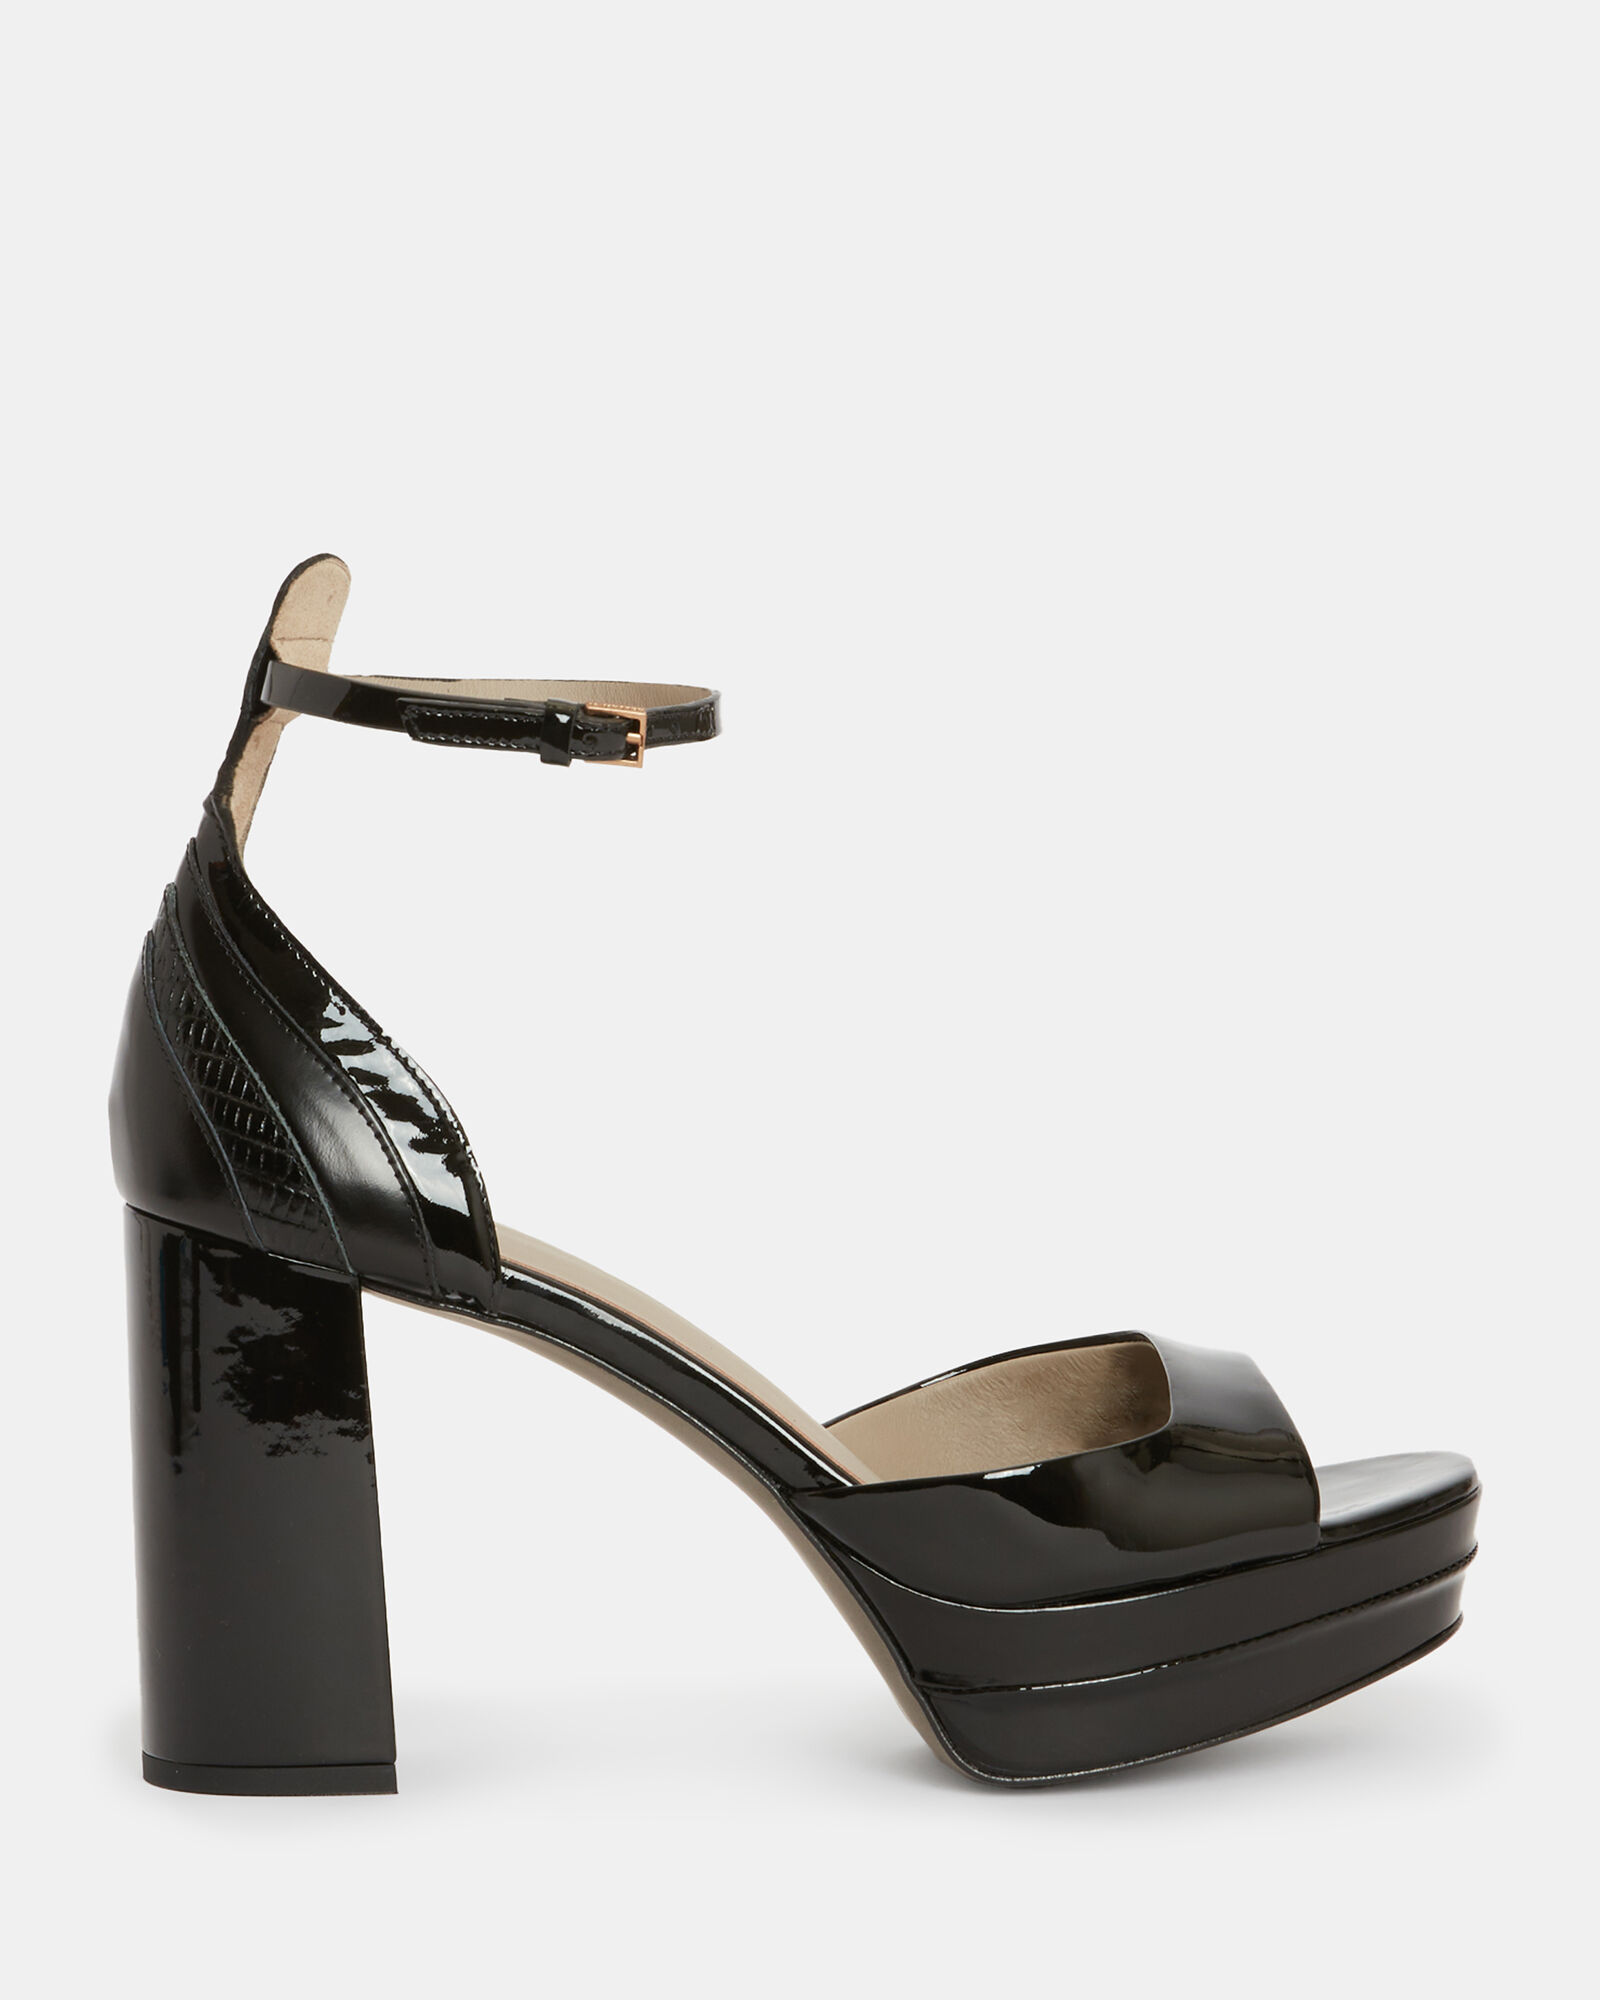 Black Sandal High Heel Sandal - Shaneen Fashion - Payment on delivery